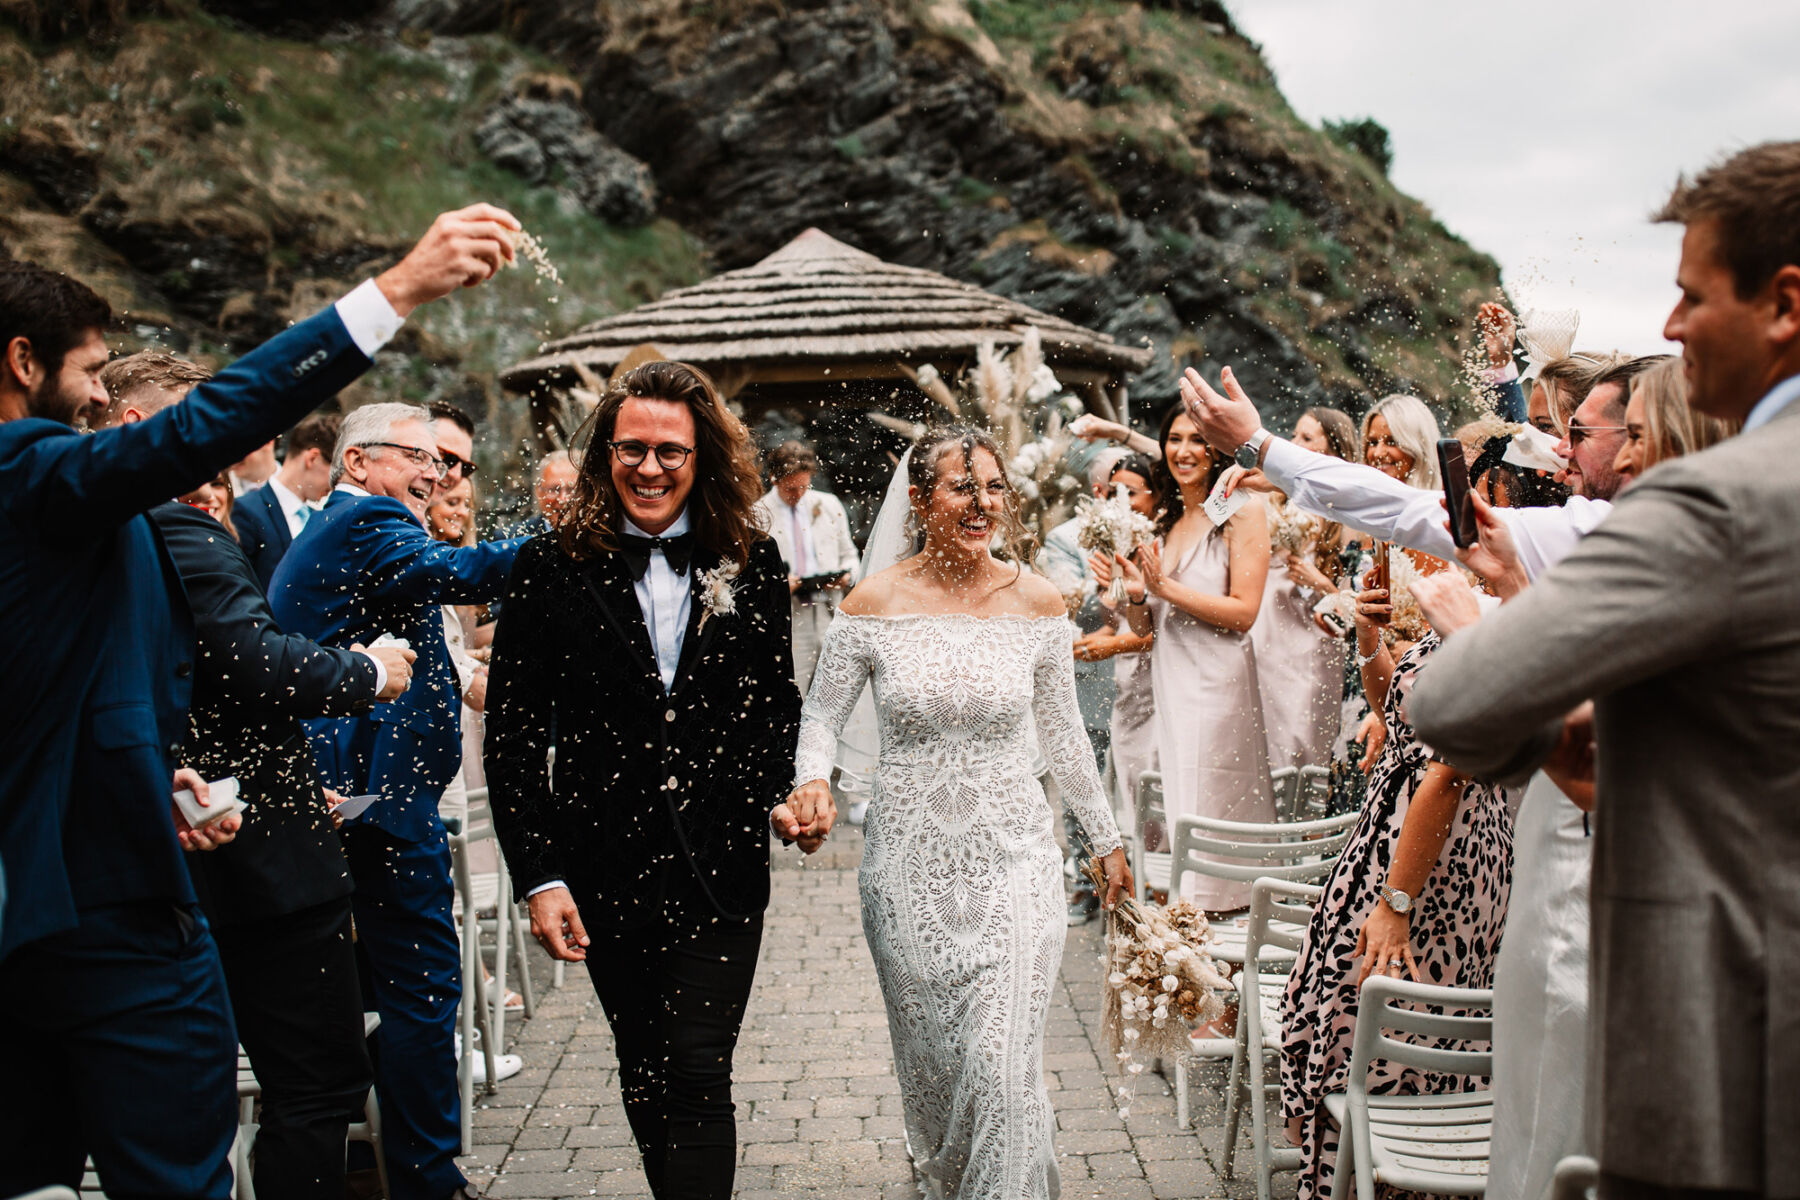 Confetti being thrown over a bride and groom at Tunnels Beaches in Devon. Bride wears Grace Loves Lace wedding dress.